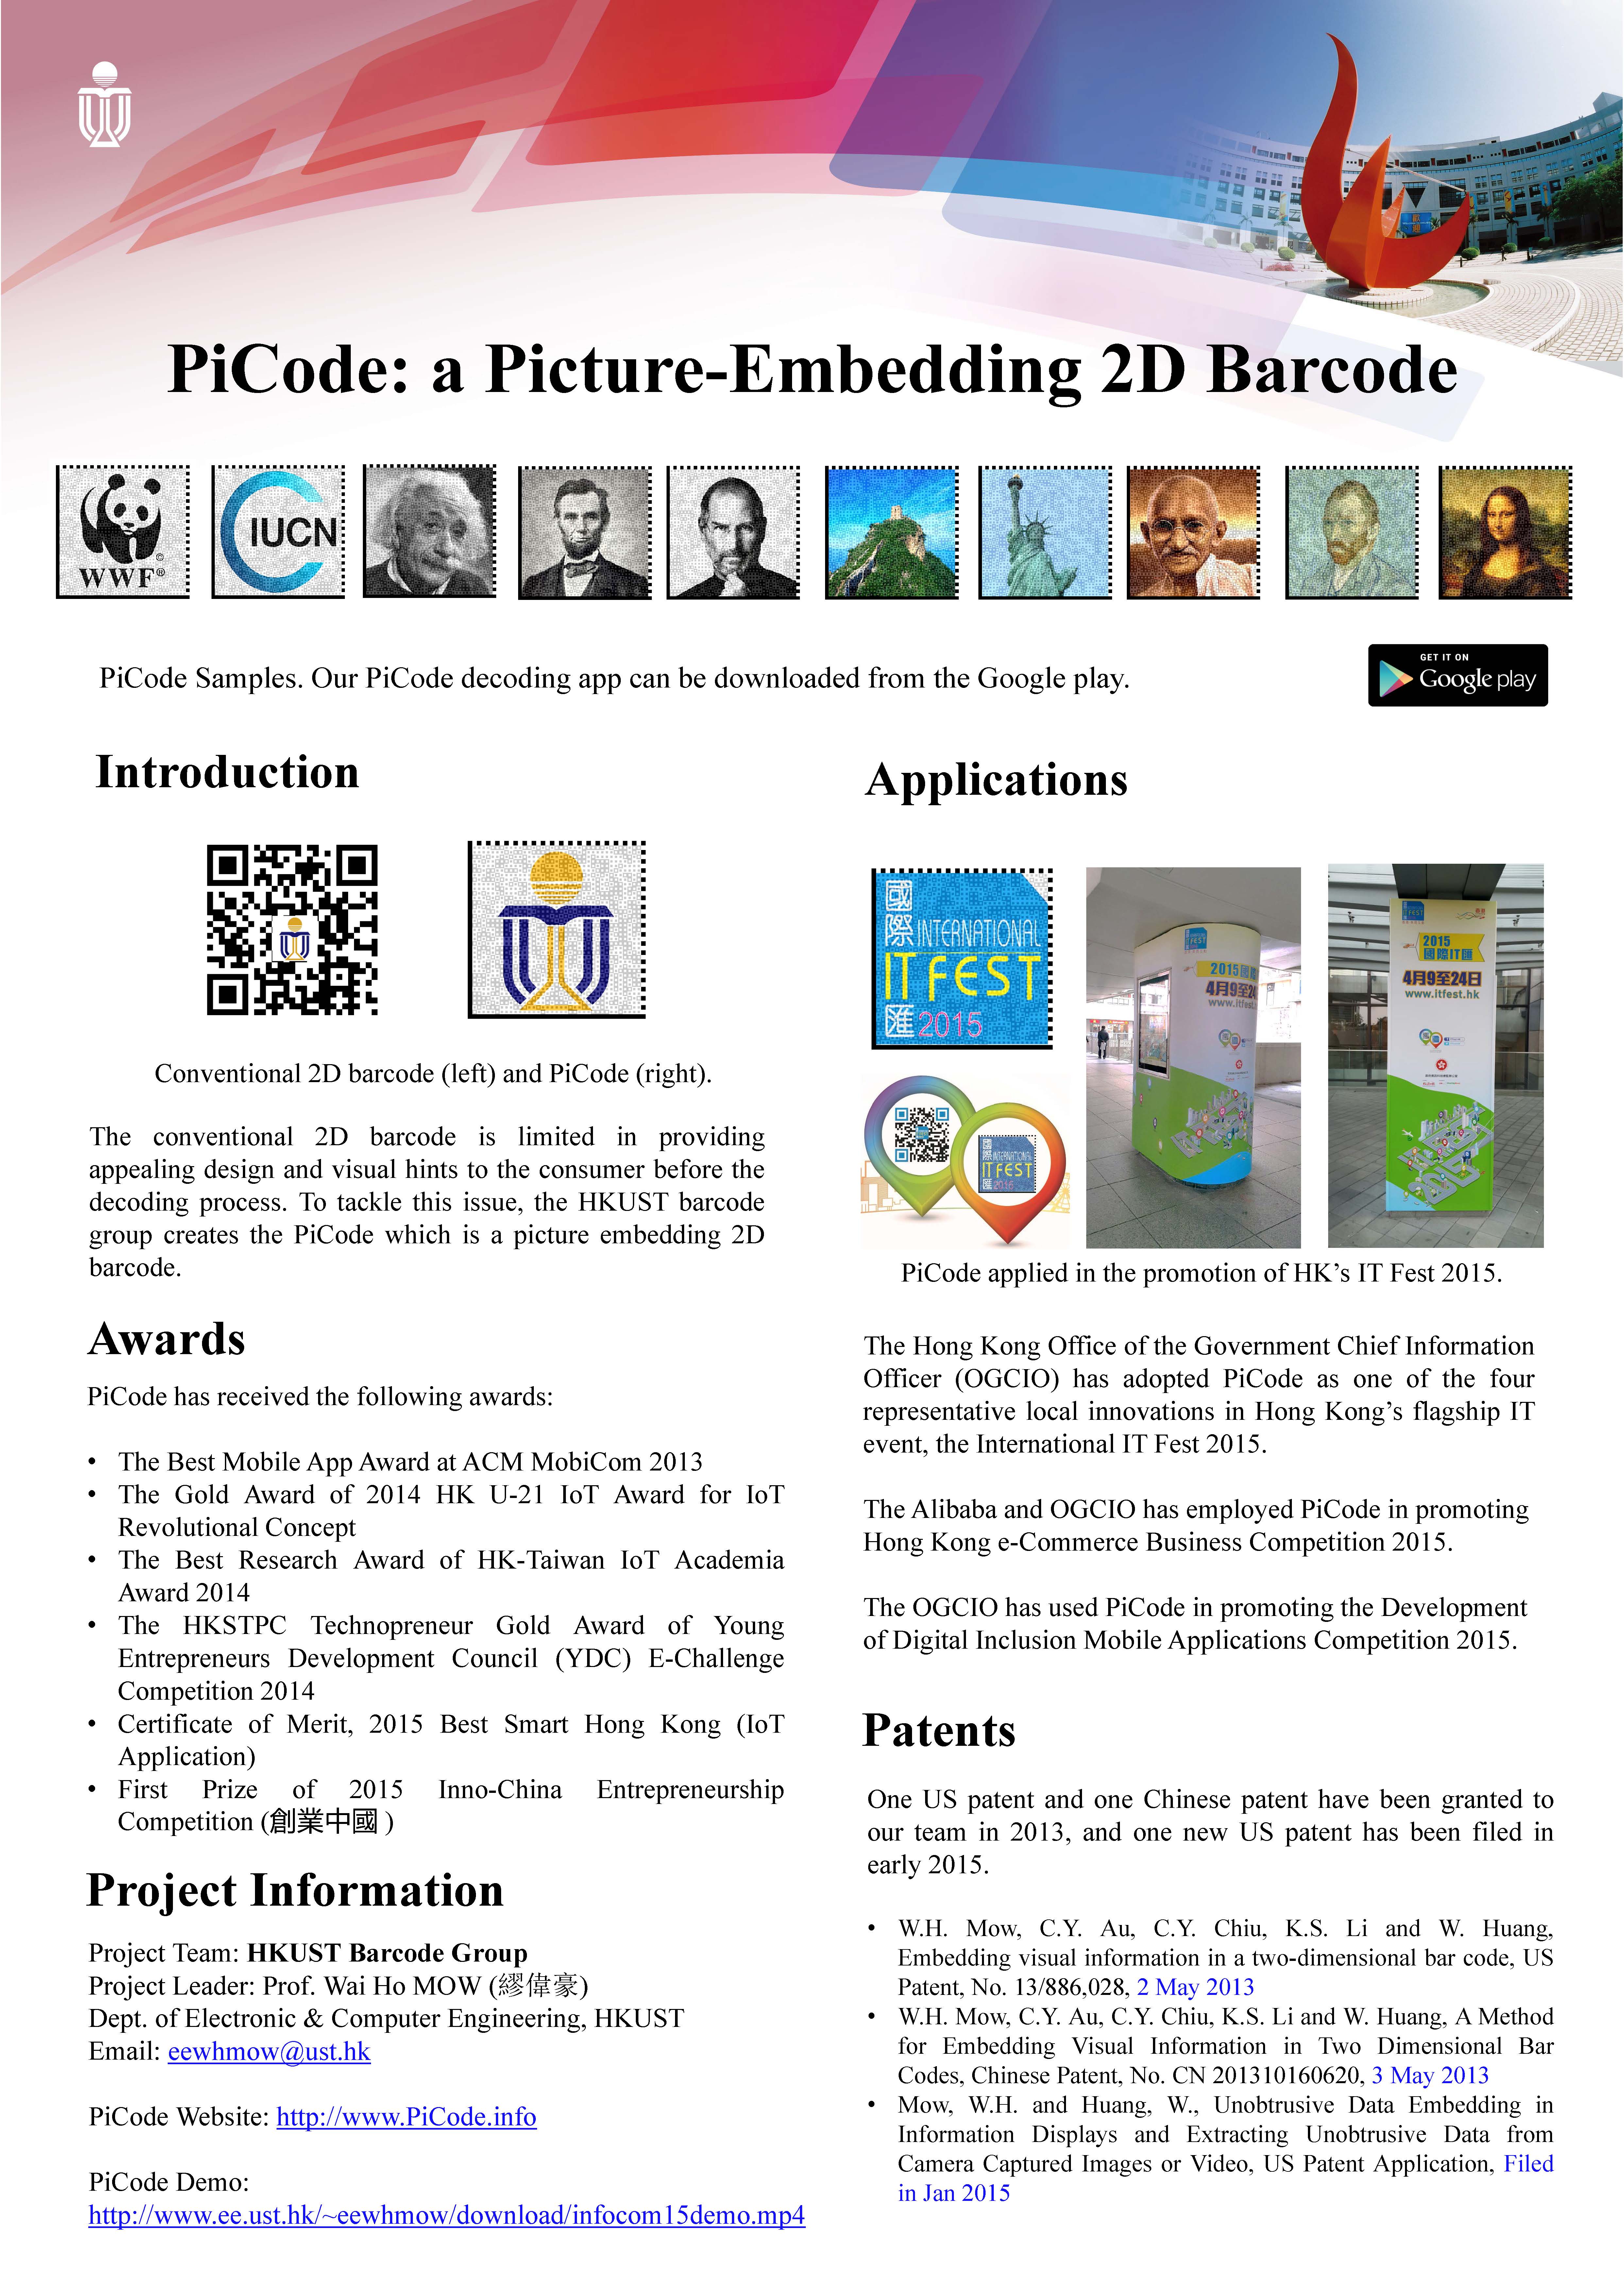 PiCode developed by Prof. Wai Ho MOW's HKUST Barcode Group